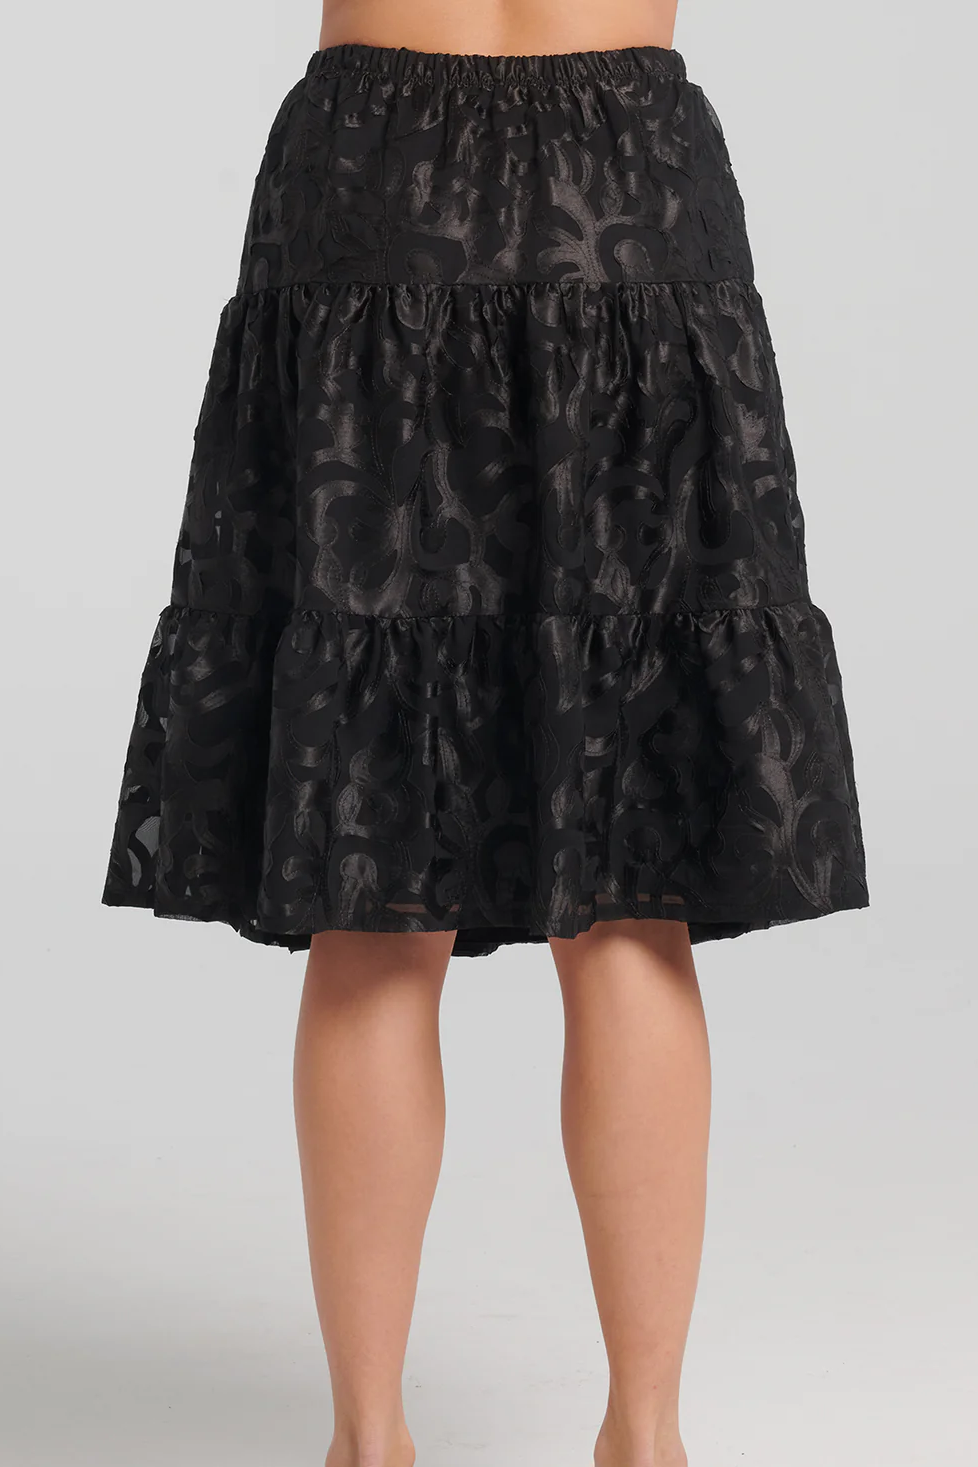 Back waist-down view of a woman wearing the Zimmer Skirt by Kollontai in Black, standing in front of a grey background